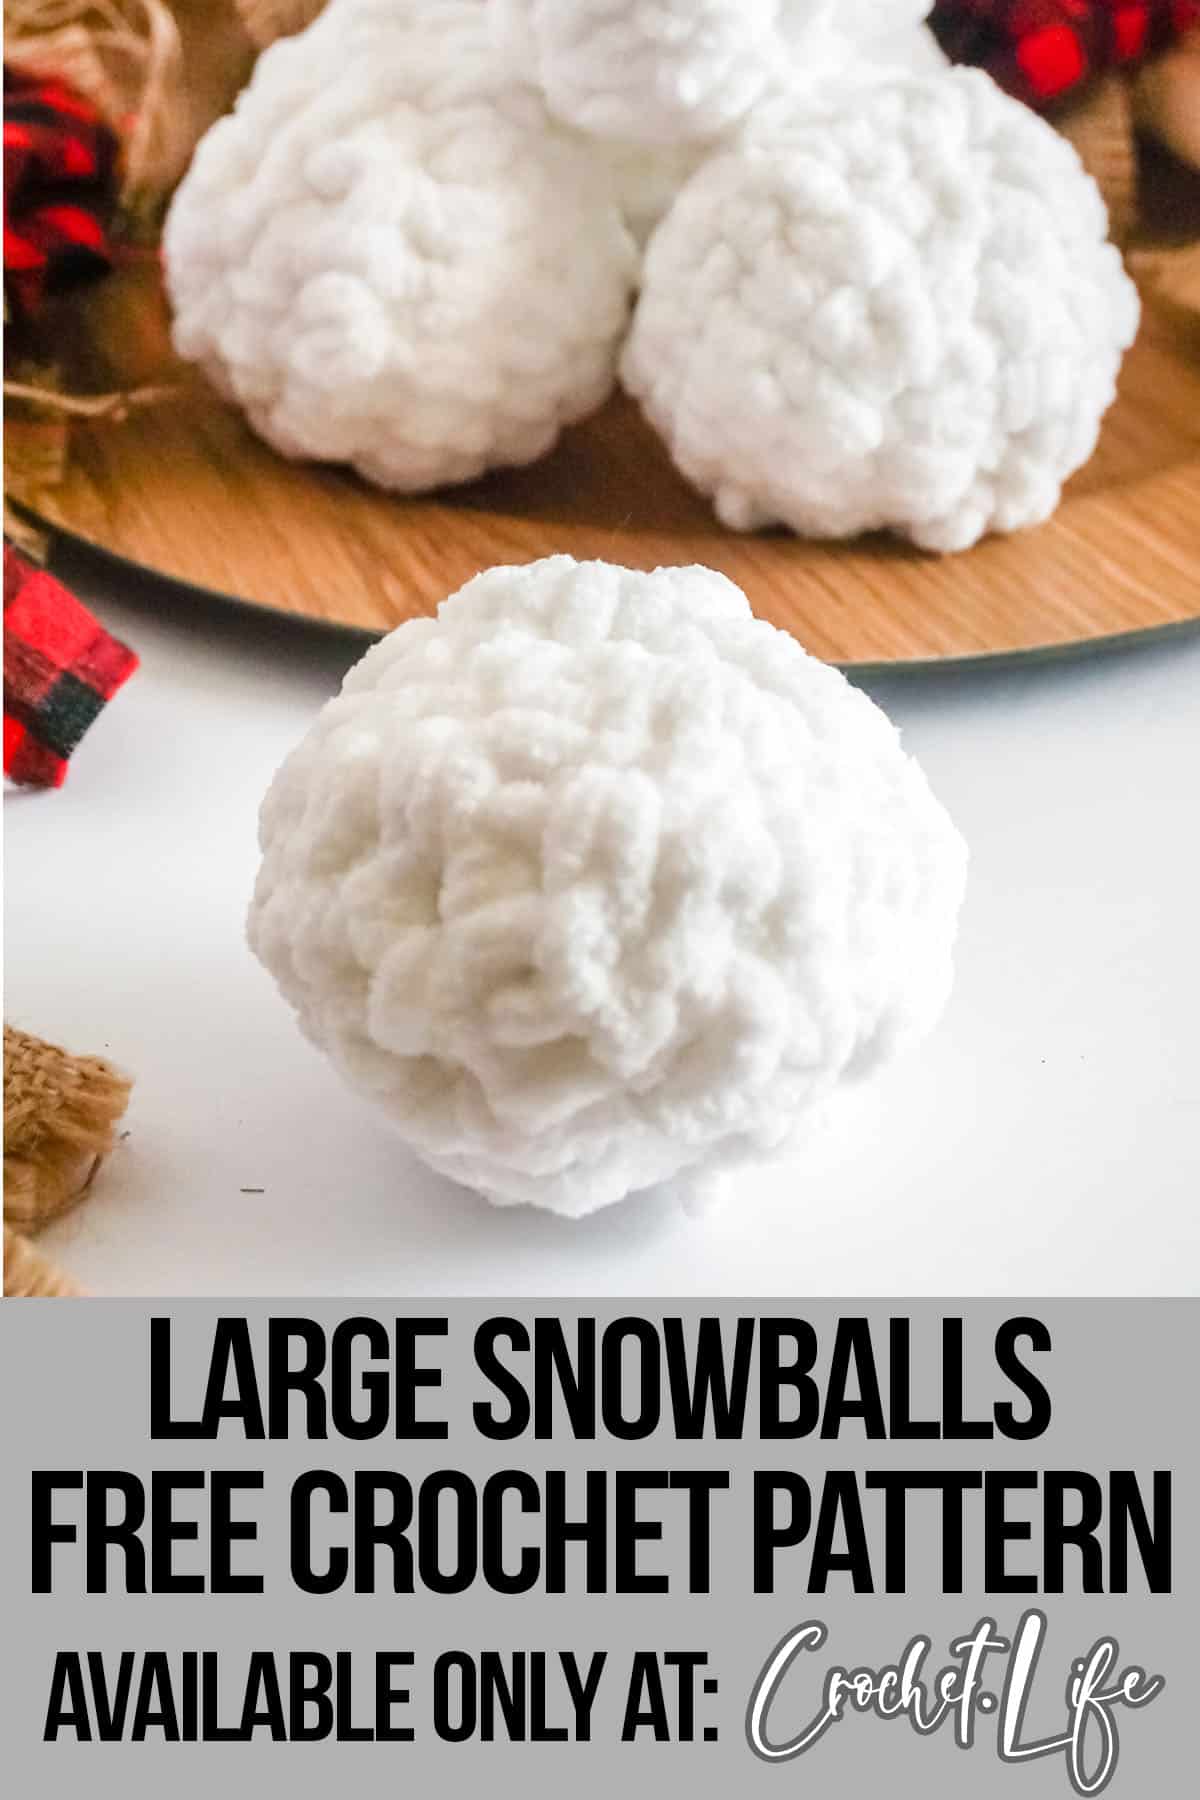 crochet snowball pattern with text which reads large snowball free crochet pattern